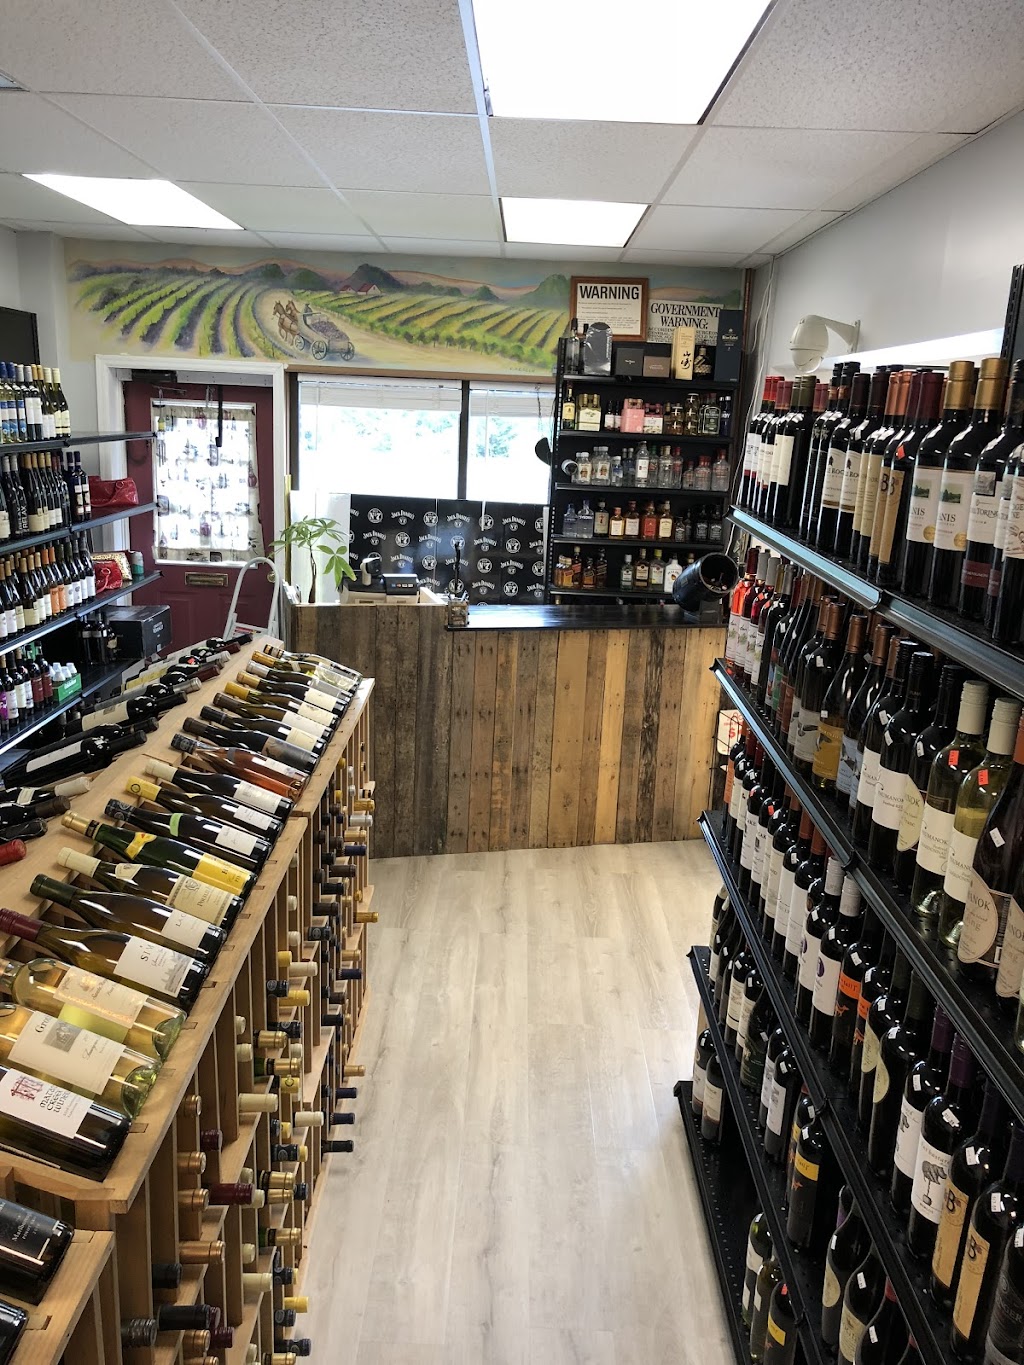 South Shore Wines & Liquors | 440 S Country Rd, East Patchogue, NY 11772 | Phone: (631) 289-9463